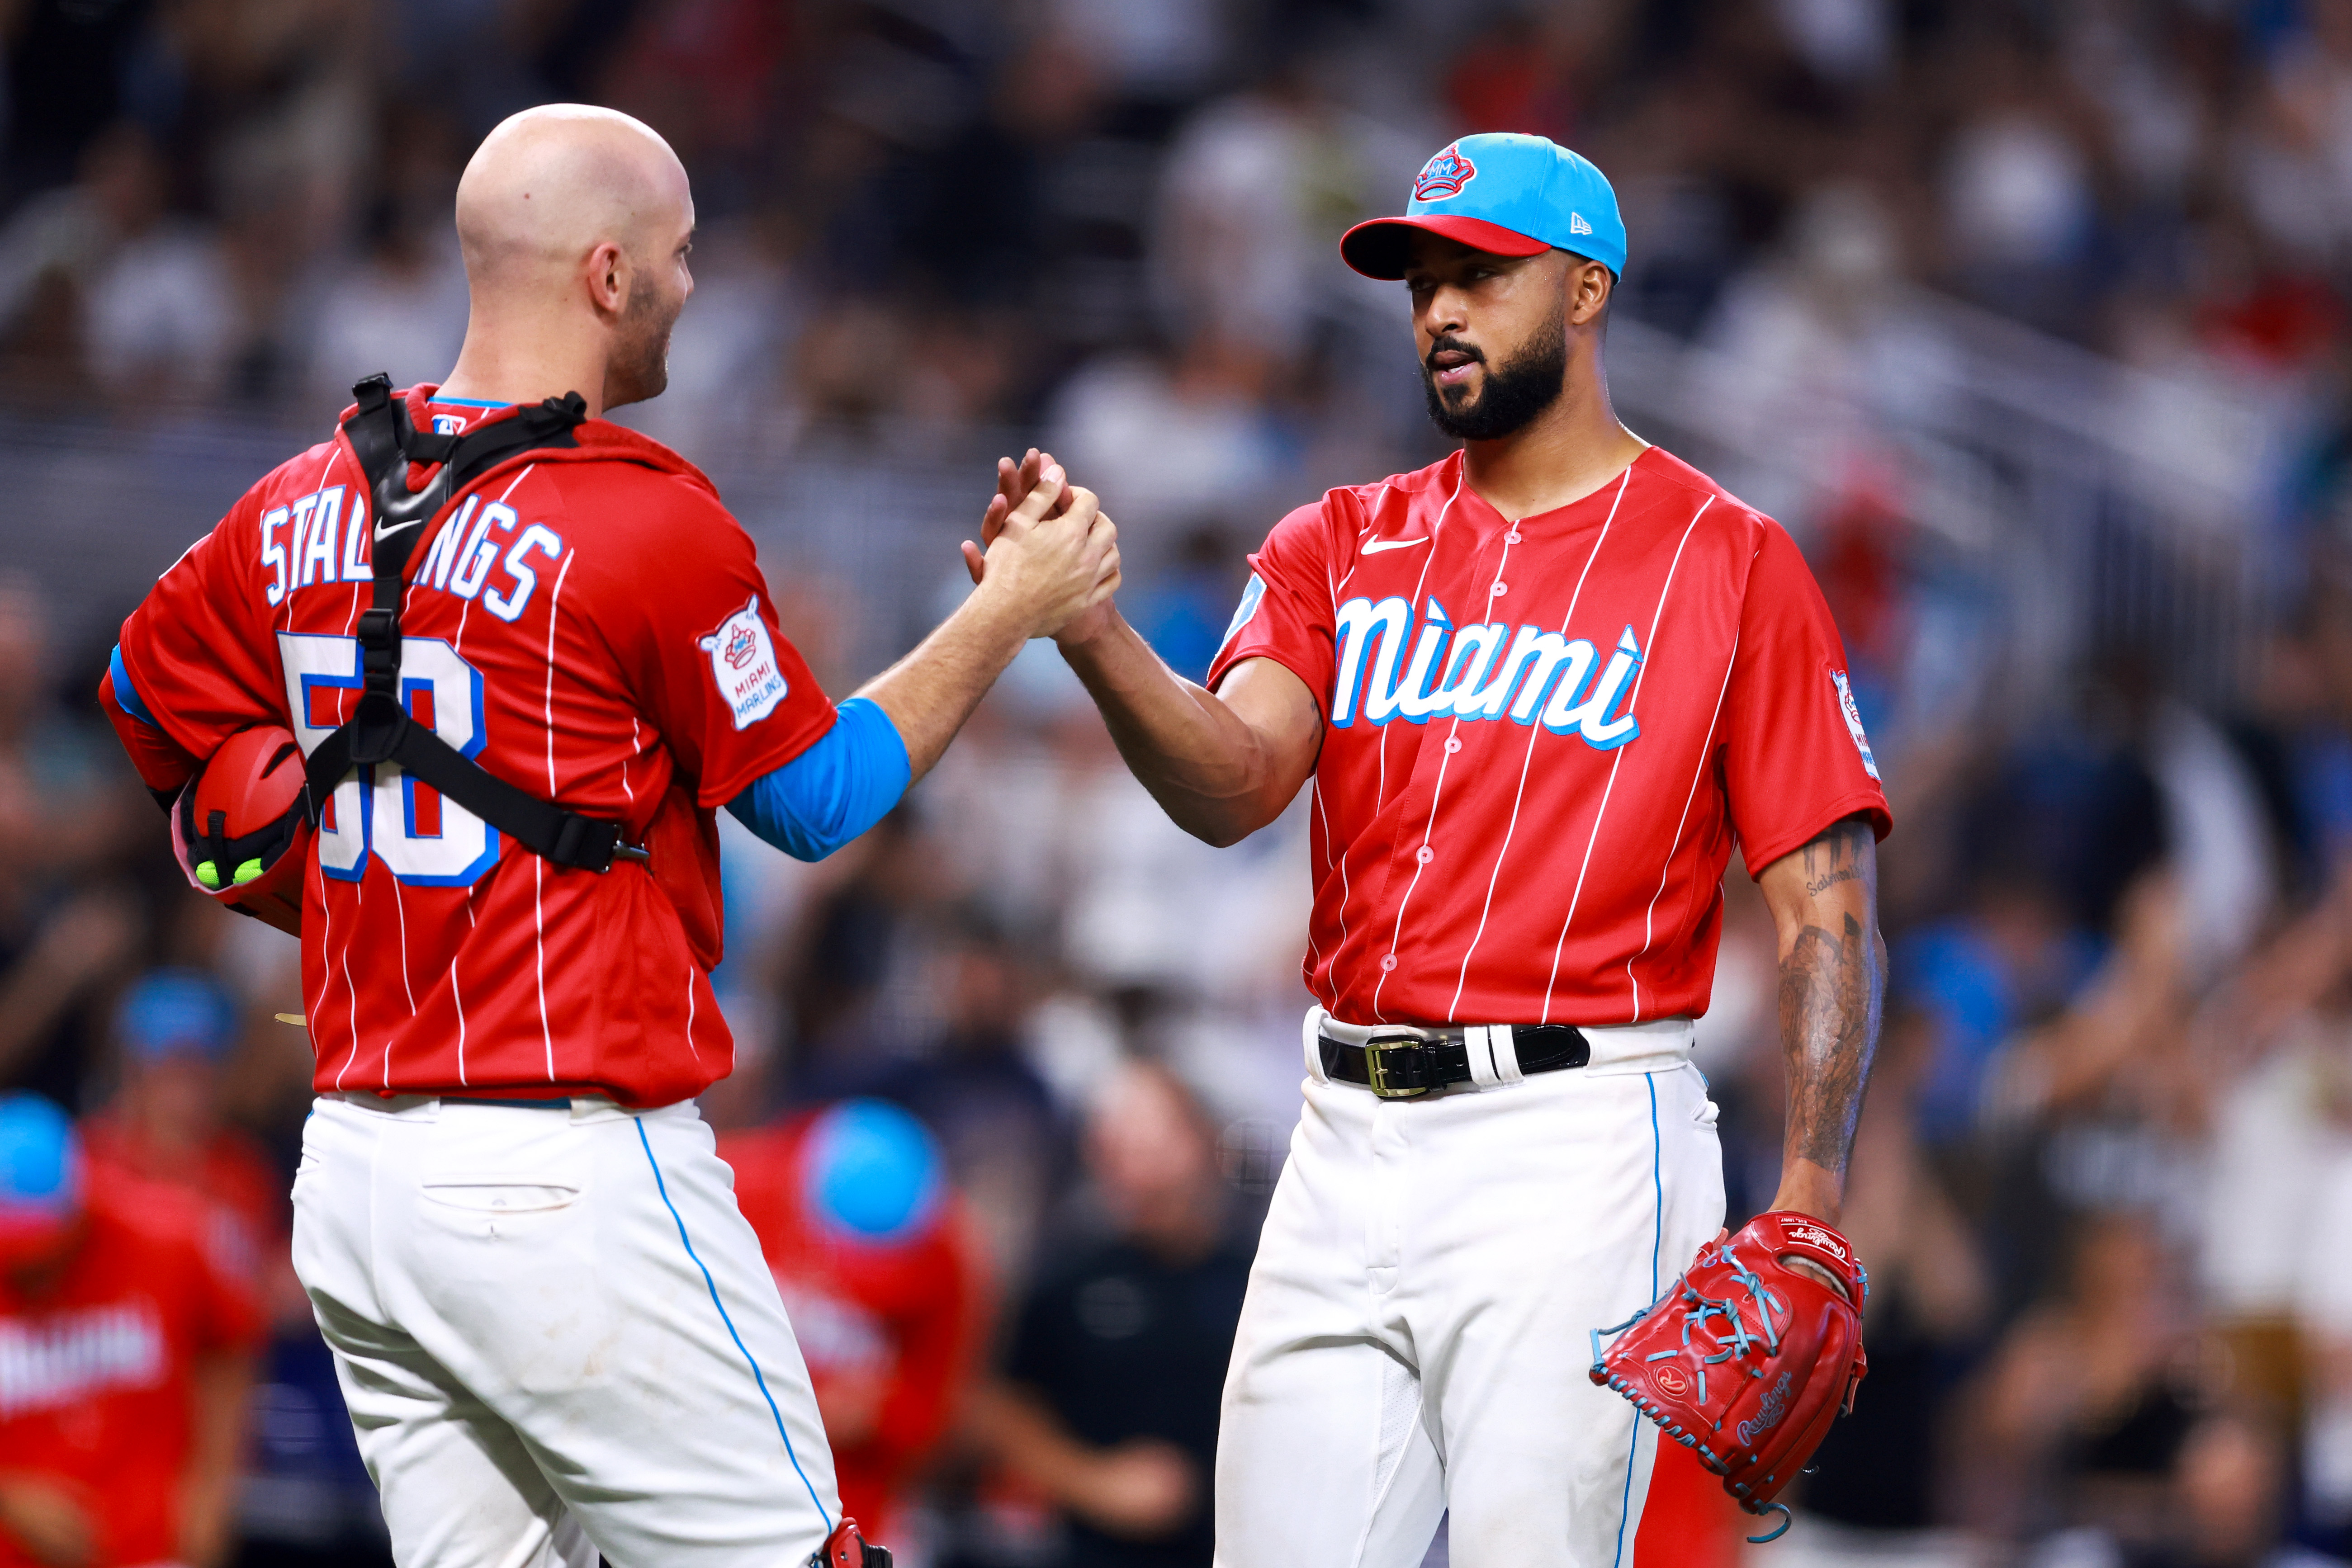 Teal deal: Miami Marlins must bring old colors back for good